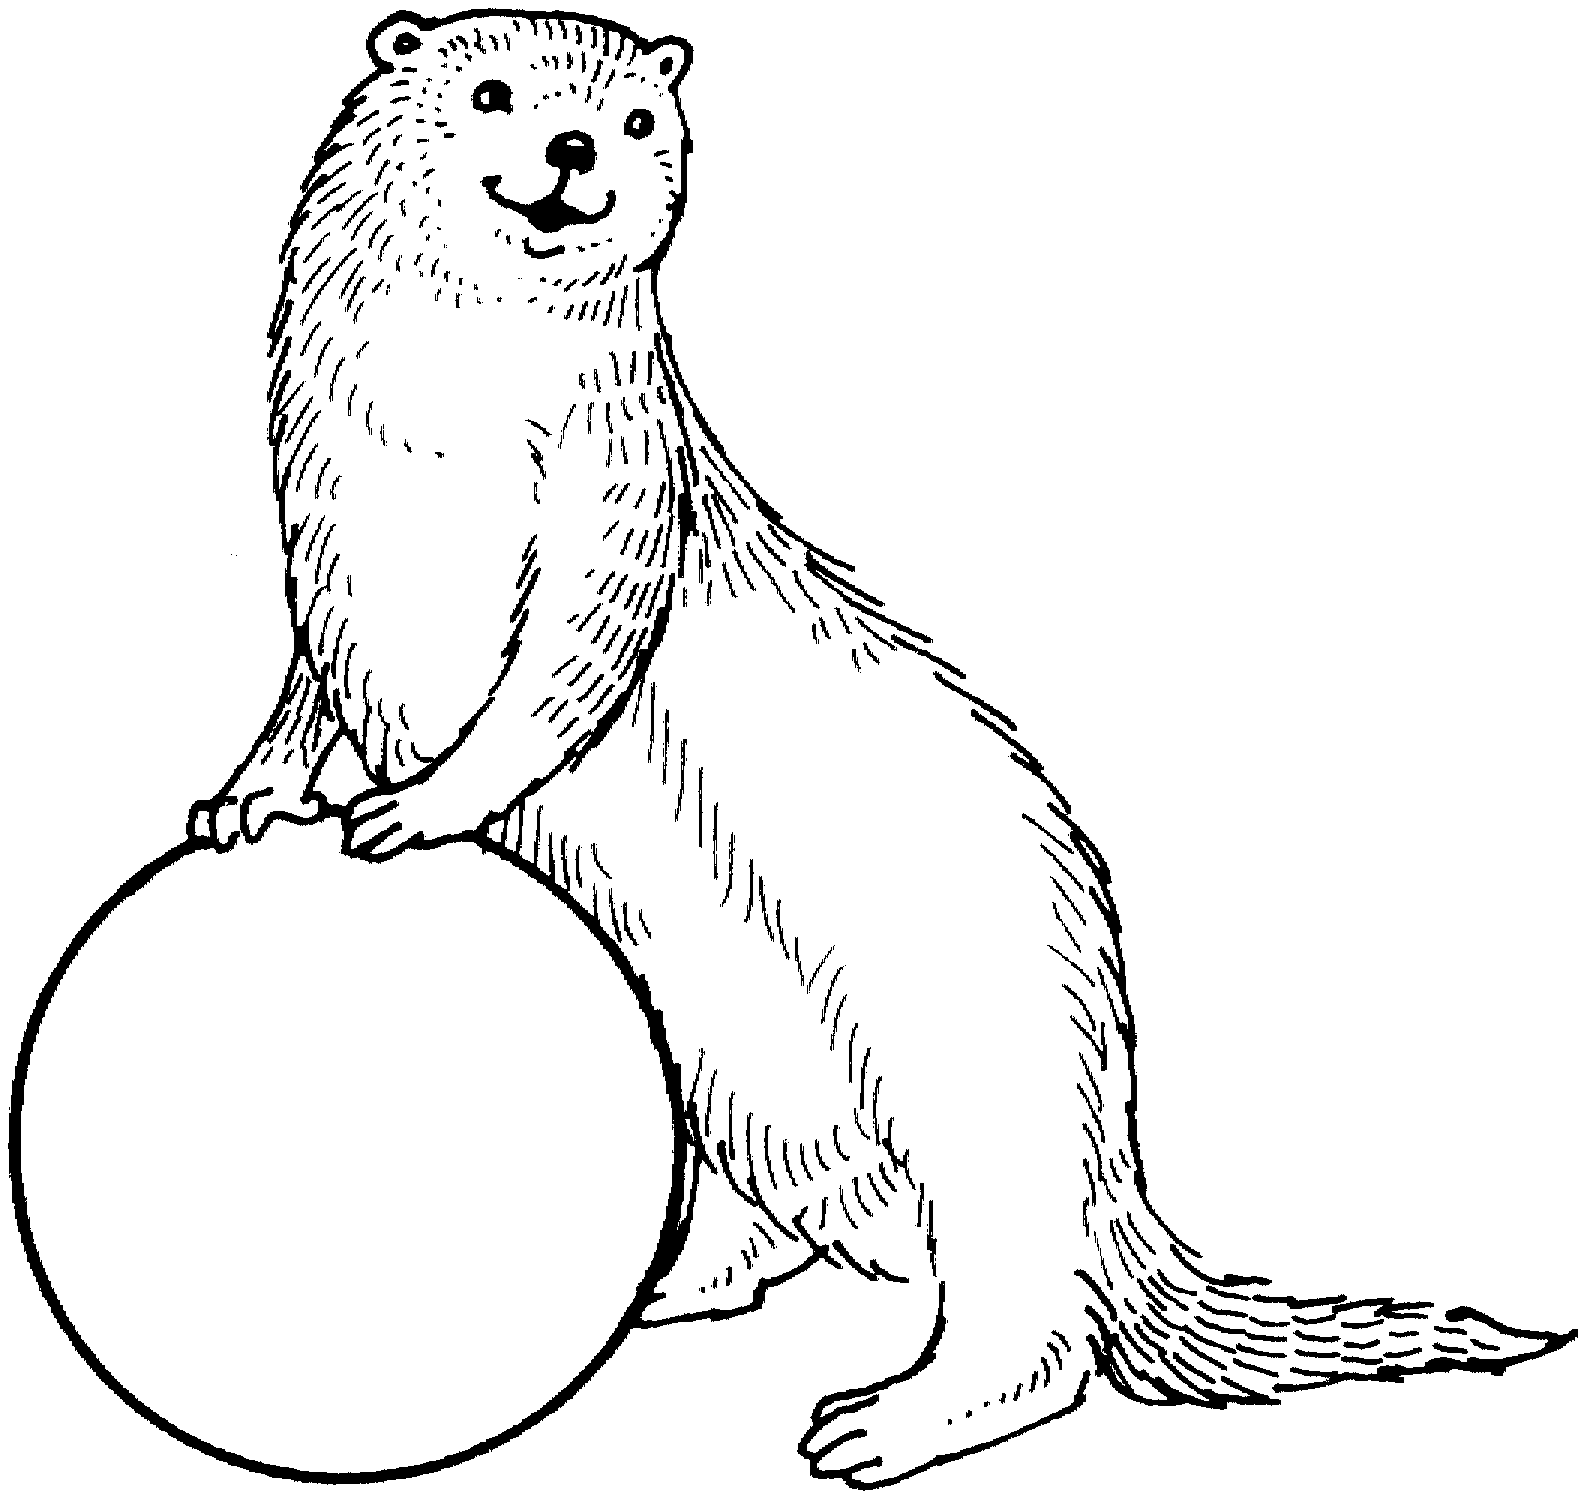 sea otter coloring page otters coloring pages free coloring pages coloring sea page otter 